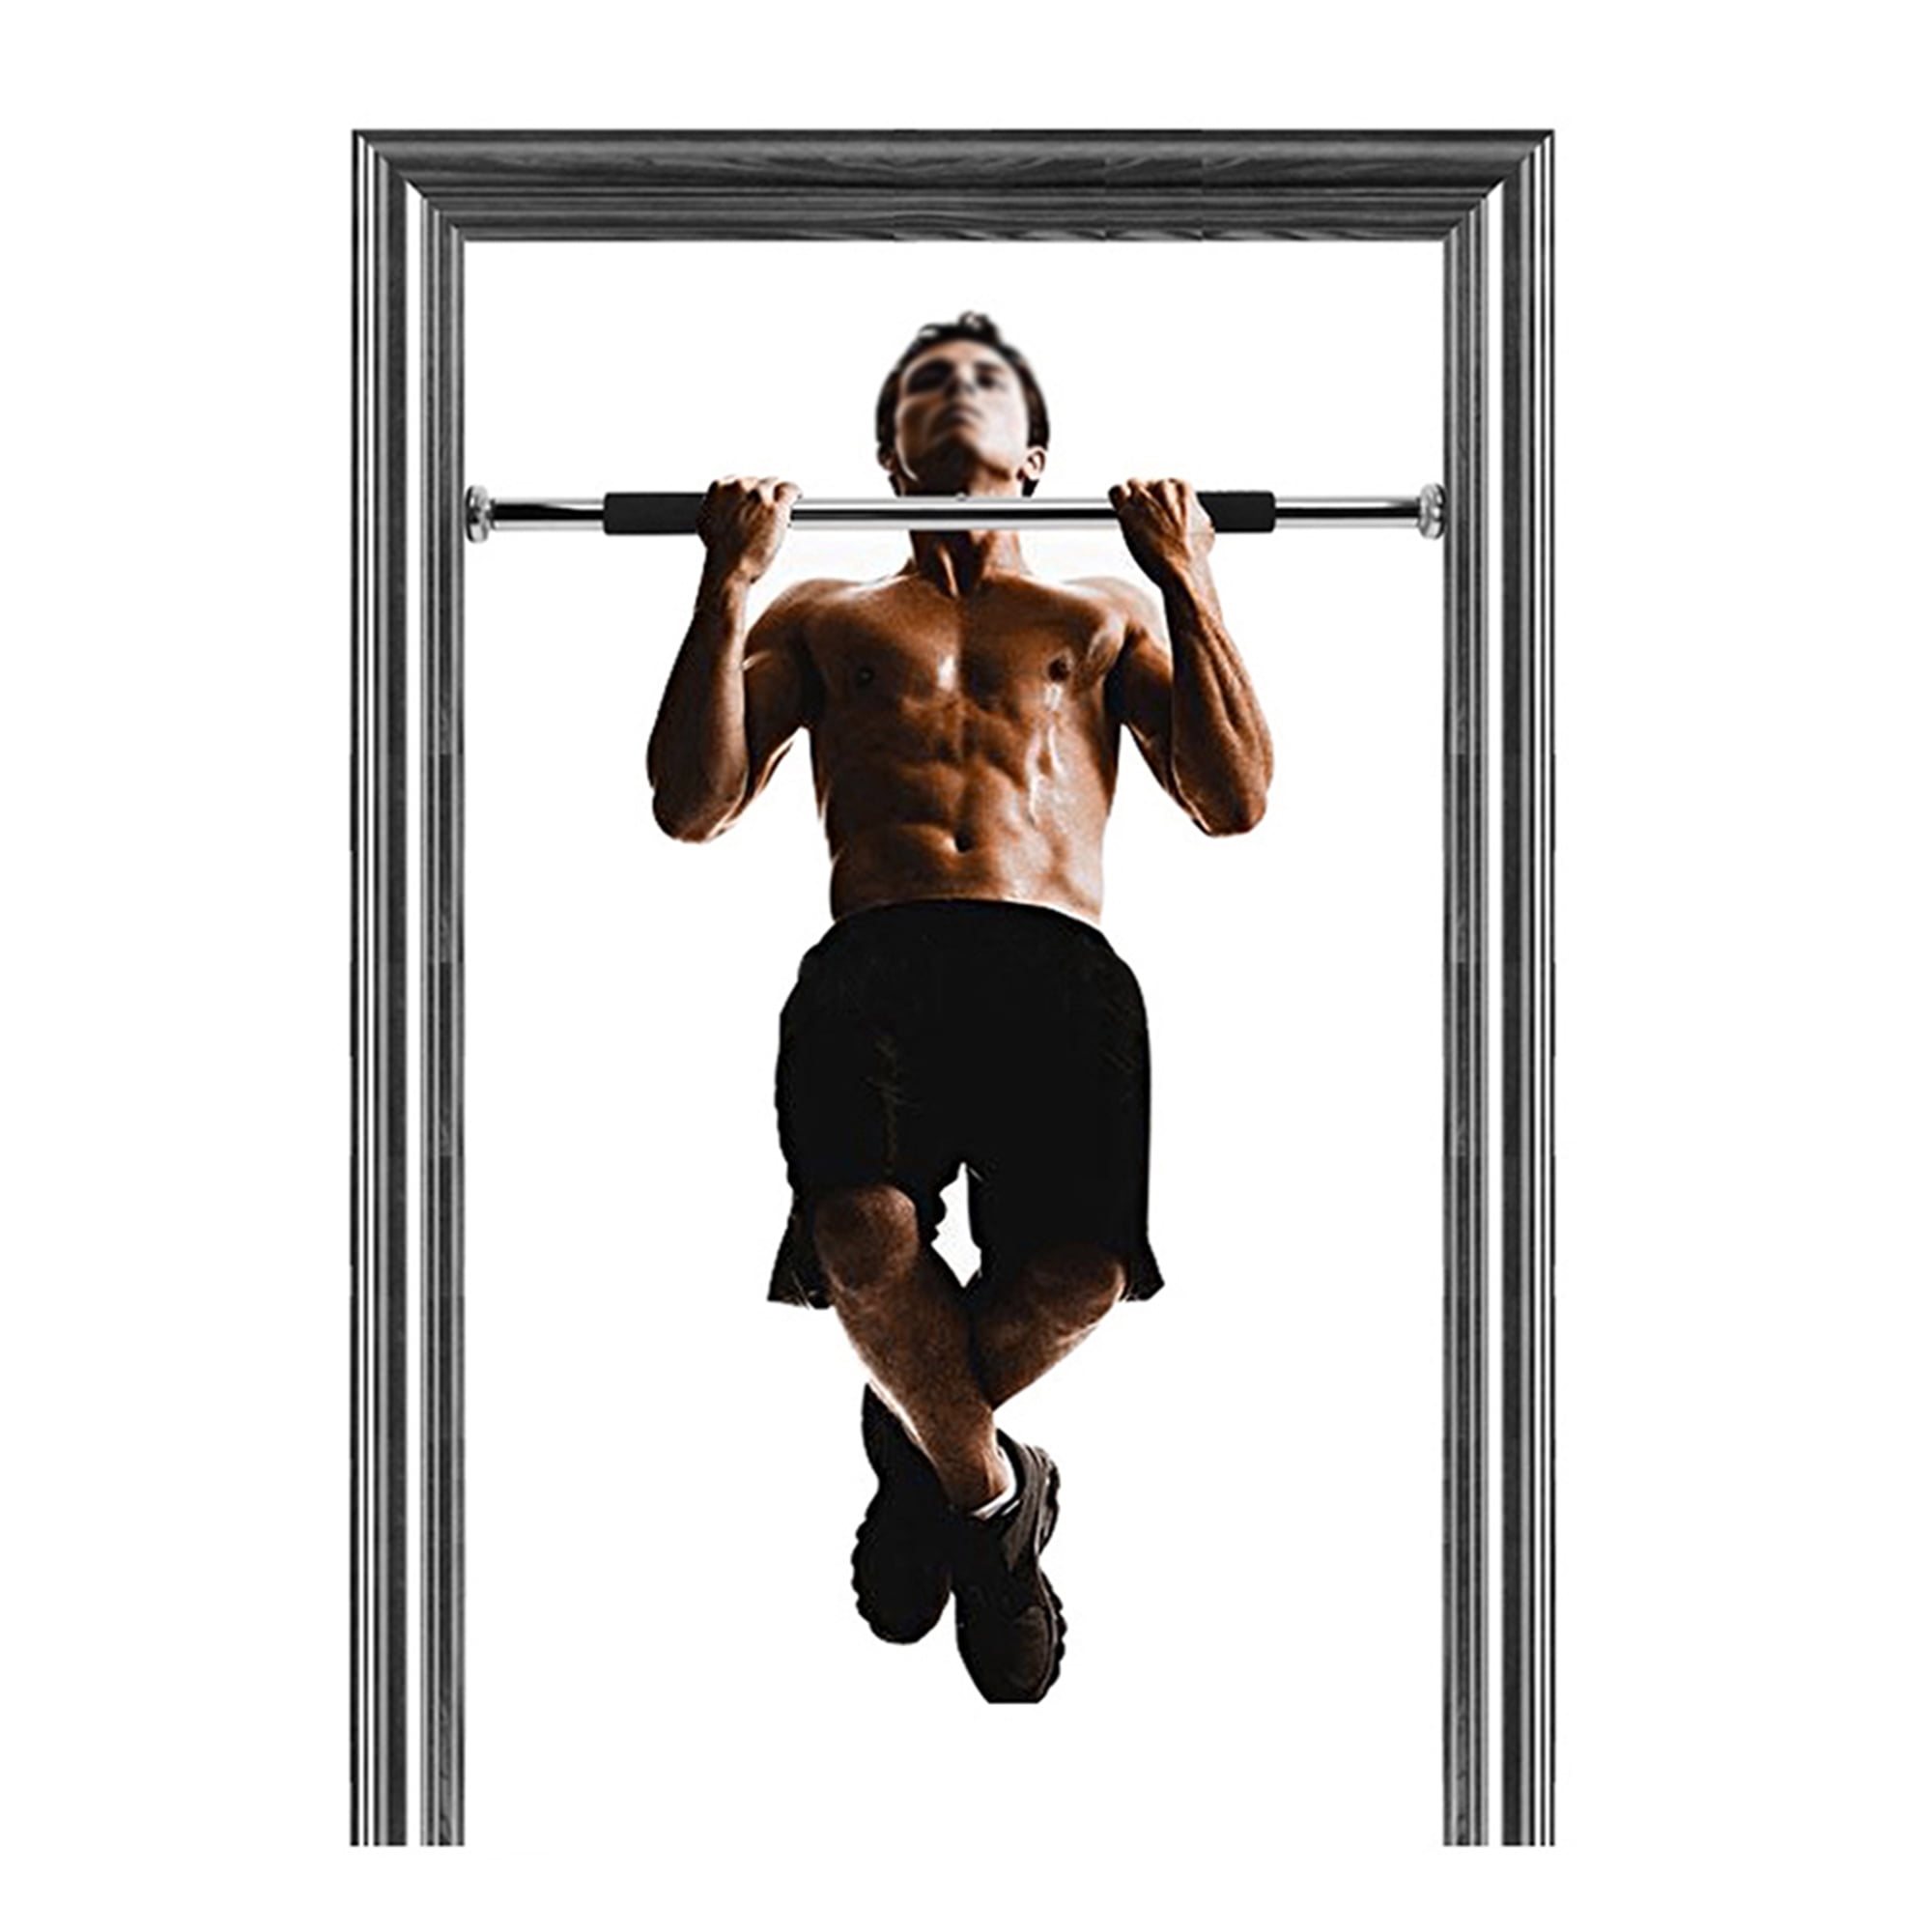 Parallel Bars Domestic Indoor Horizontal Bar Pull-up Equipment Wall Wall Hanging Door Horizontal Bar Horizontal Parallel Bars Pull-up Wall-mounted Stainless Steel Home Fitness Equipment Sporting Goods 